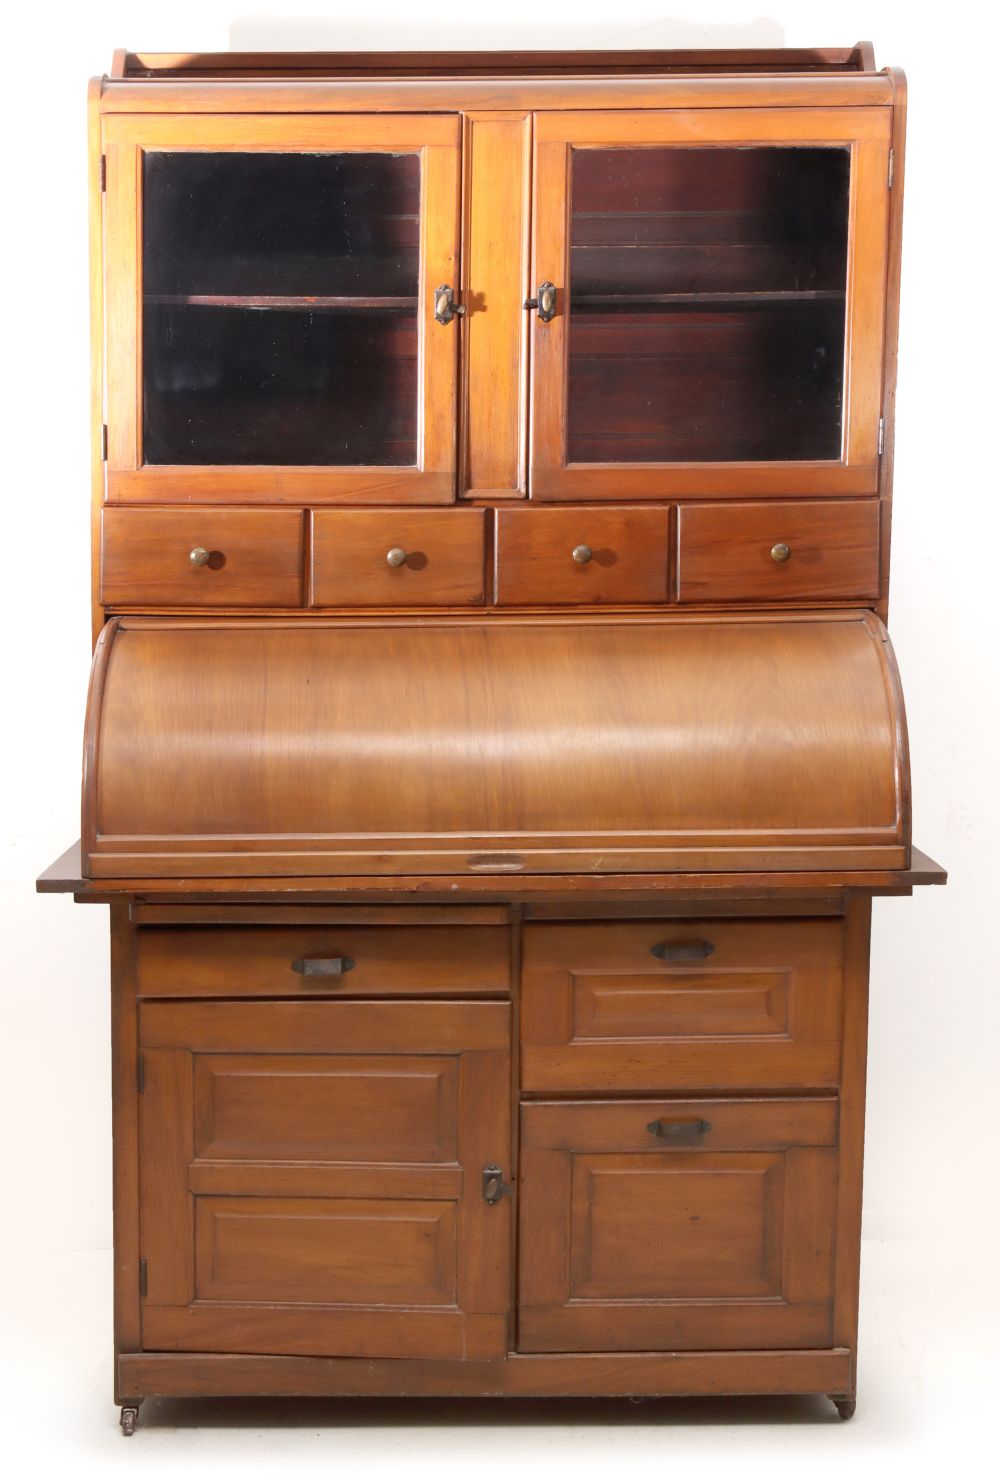 AN EARLY 20TH C. KITCHEN CABINET WITH CYLINDER ROLL